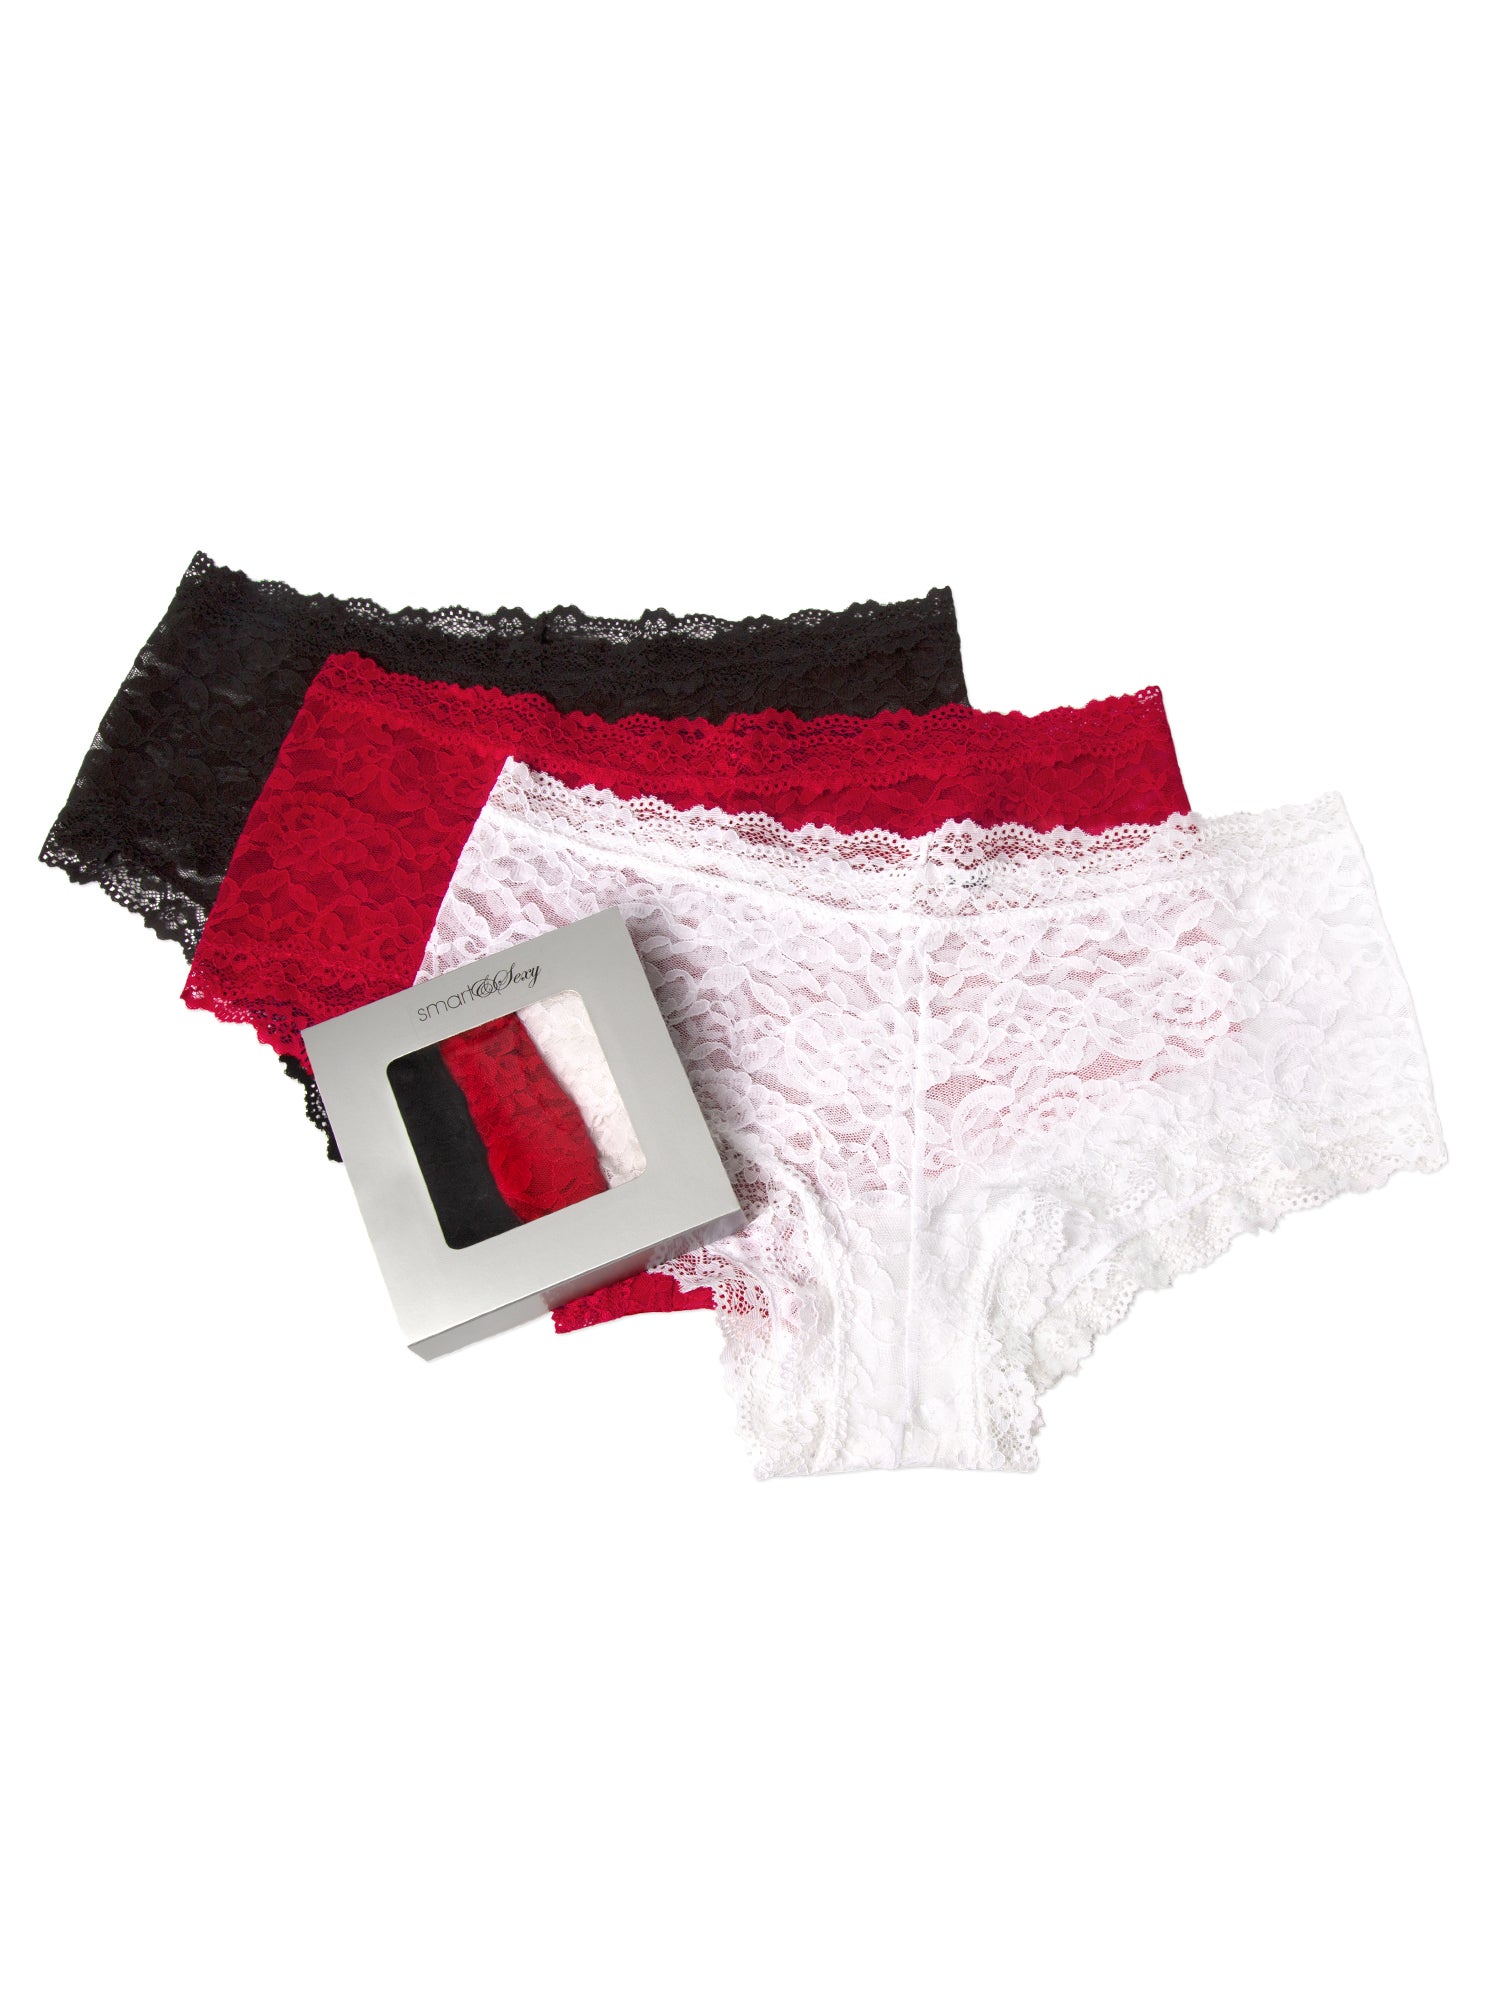 New Year, New Undies! Update Your Intimates With This Semi-Annual Sale